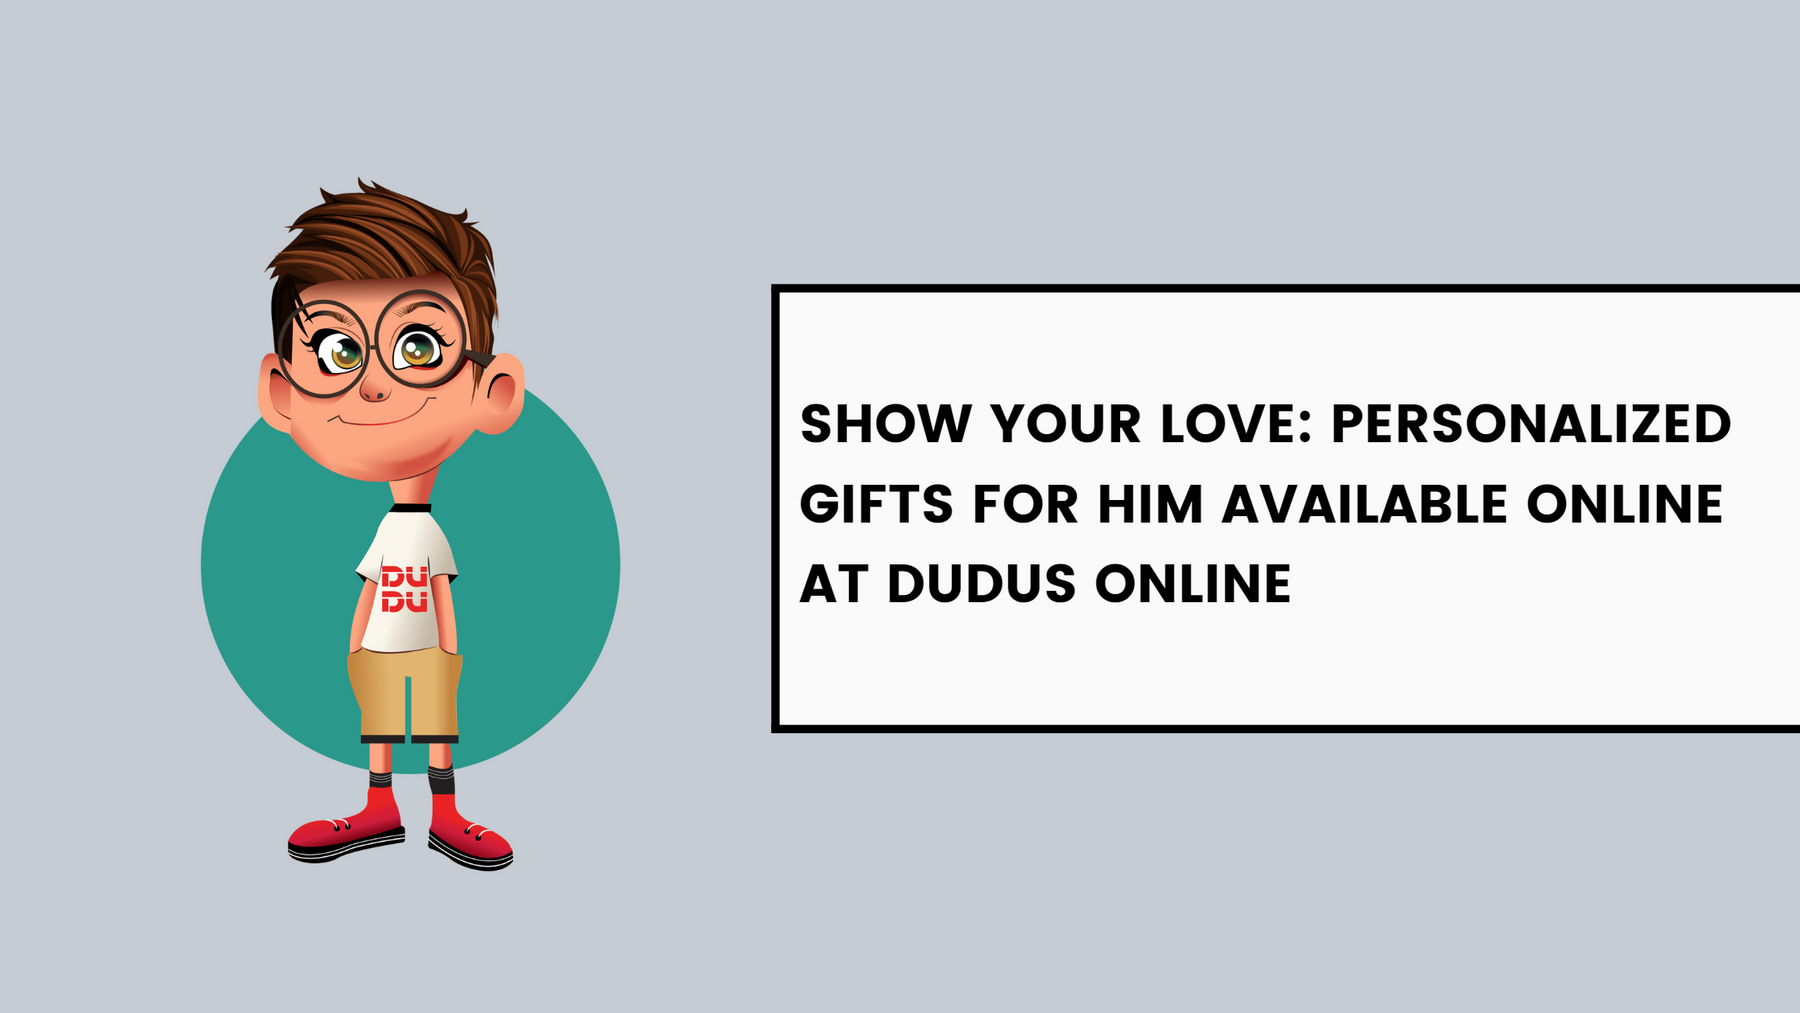 Show Your Love: Personalized Gifts For Him Available Online At Dudus Online